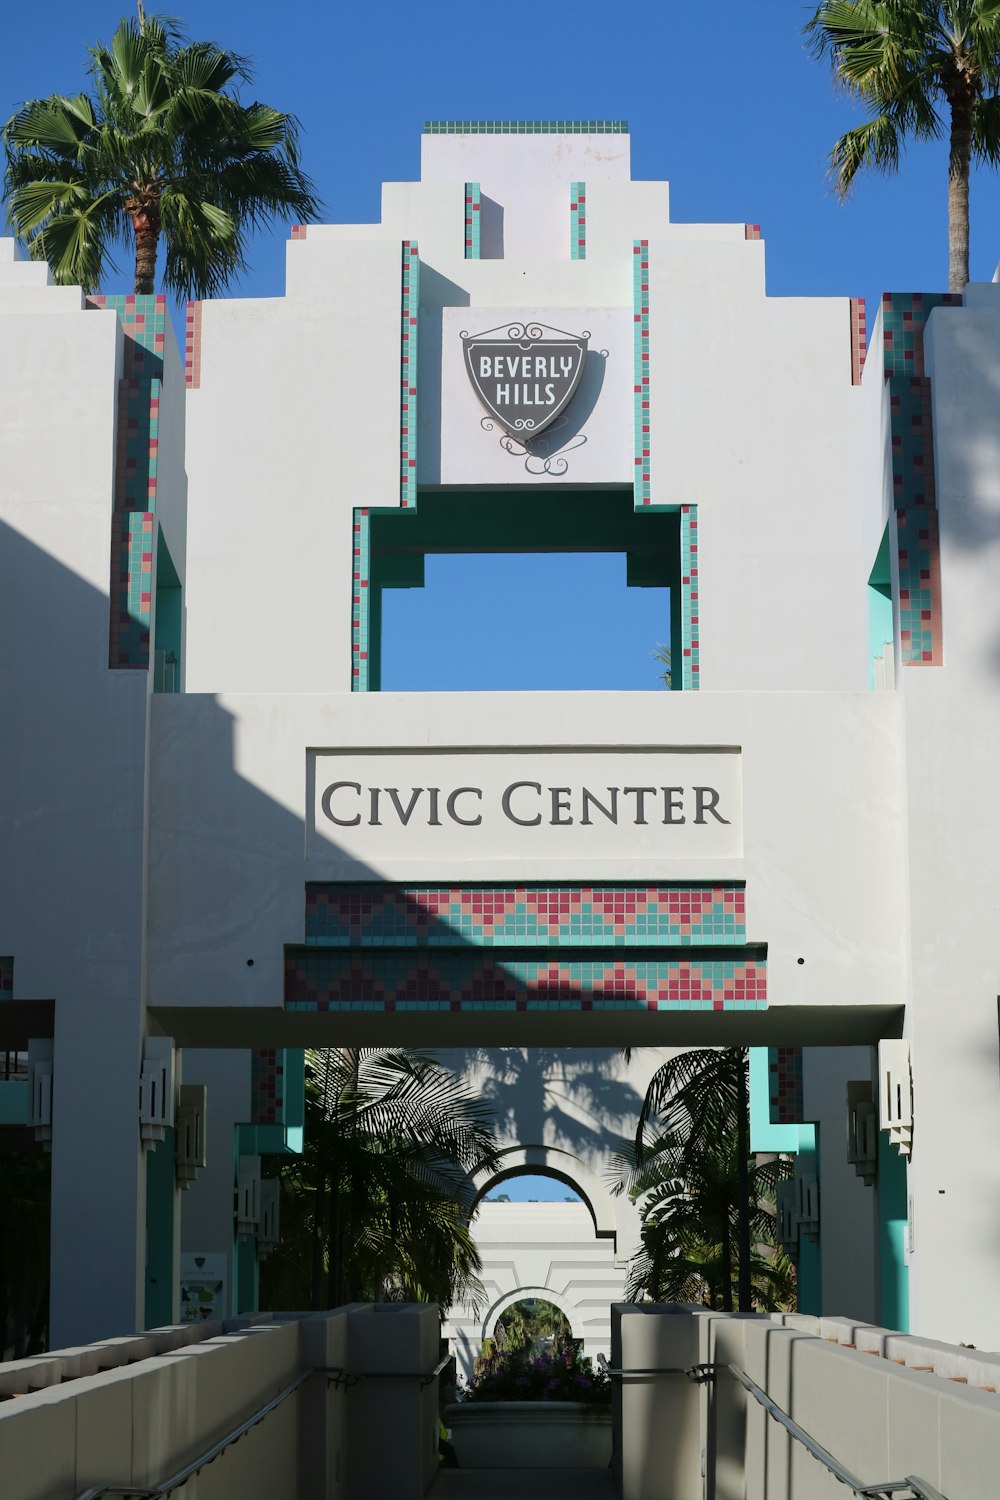 the entrance to the civic center with palm trees in the background